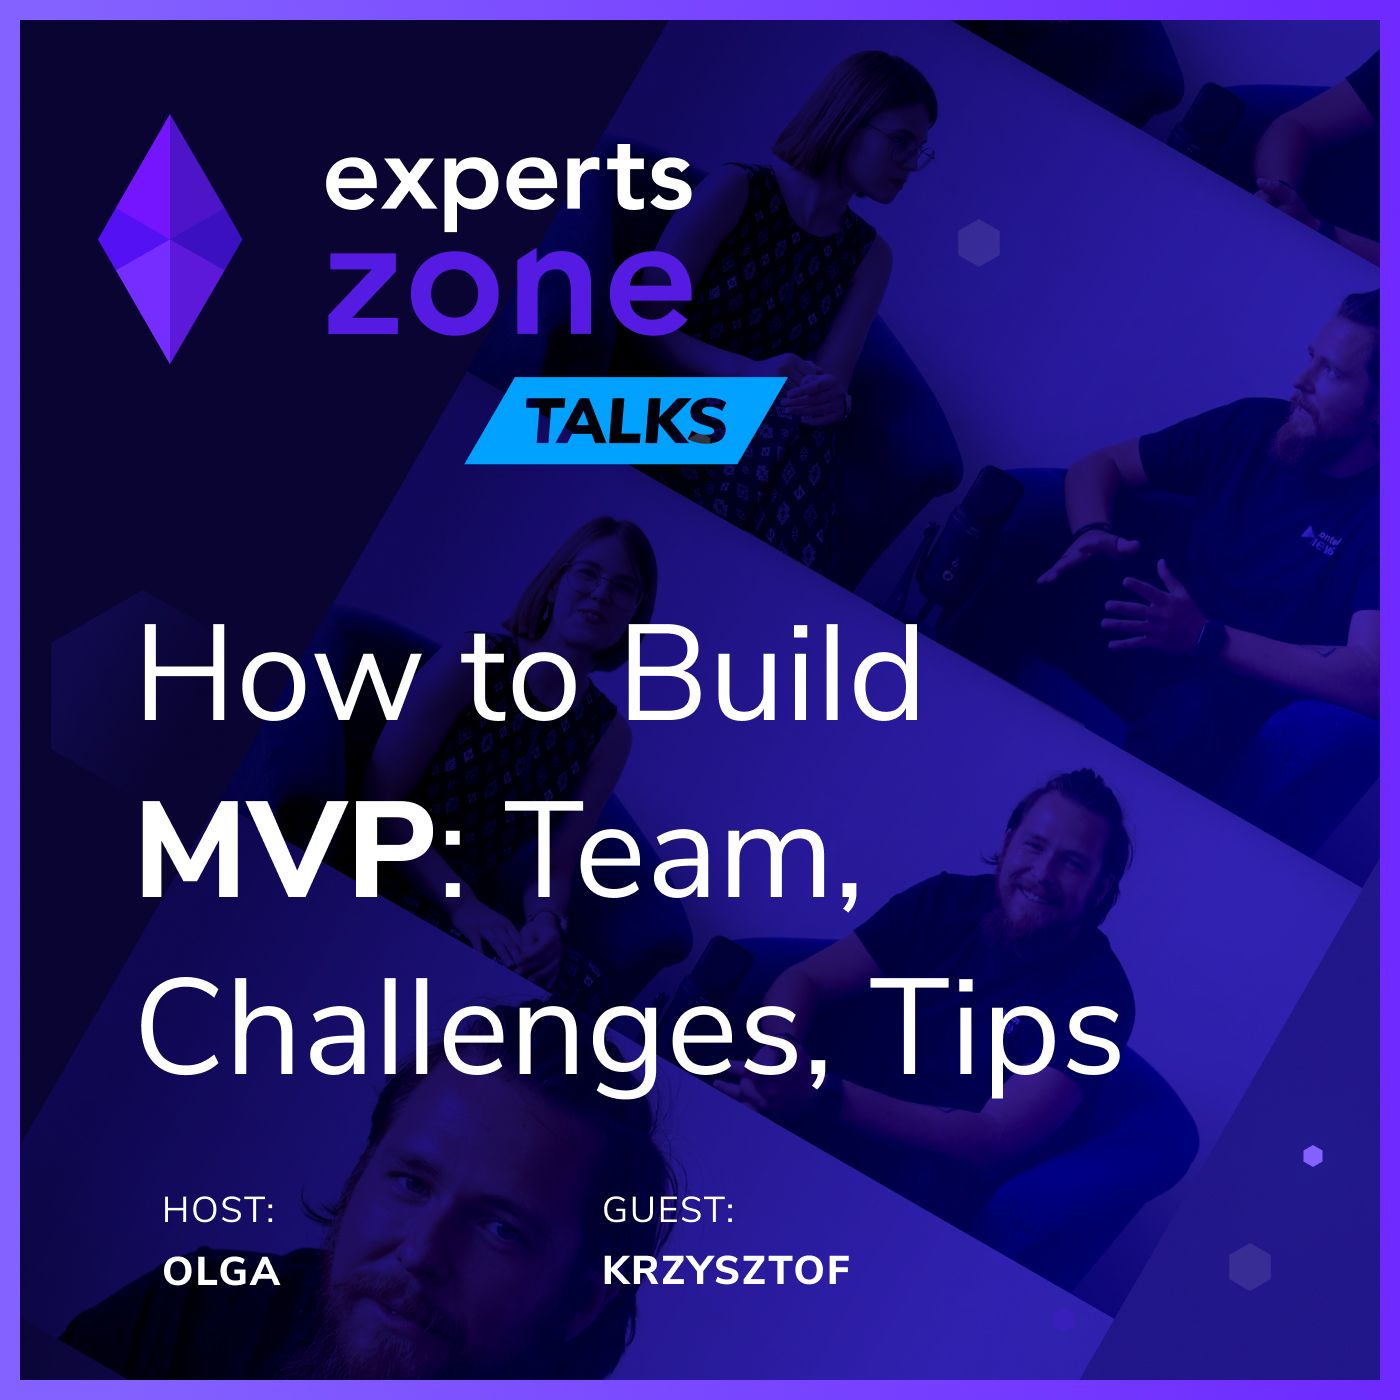 How to Build MVP: Team, Challenges, Tips - Experts Zone Talks #11 | frontendhouse.com